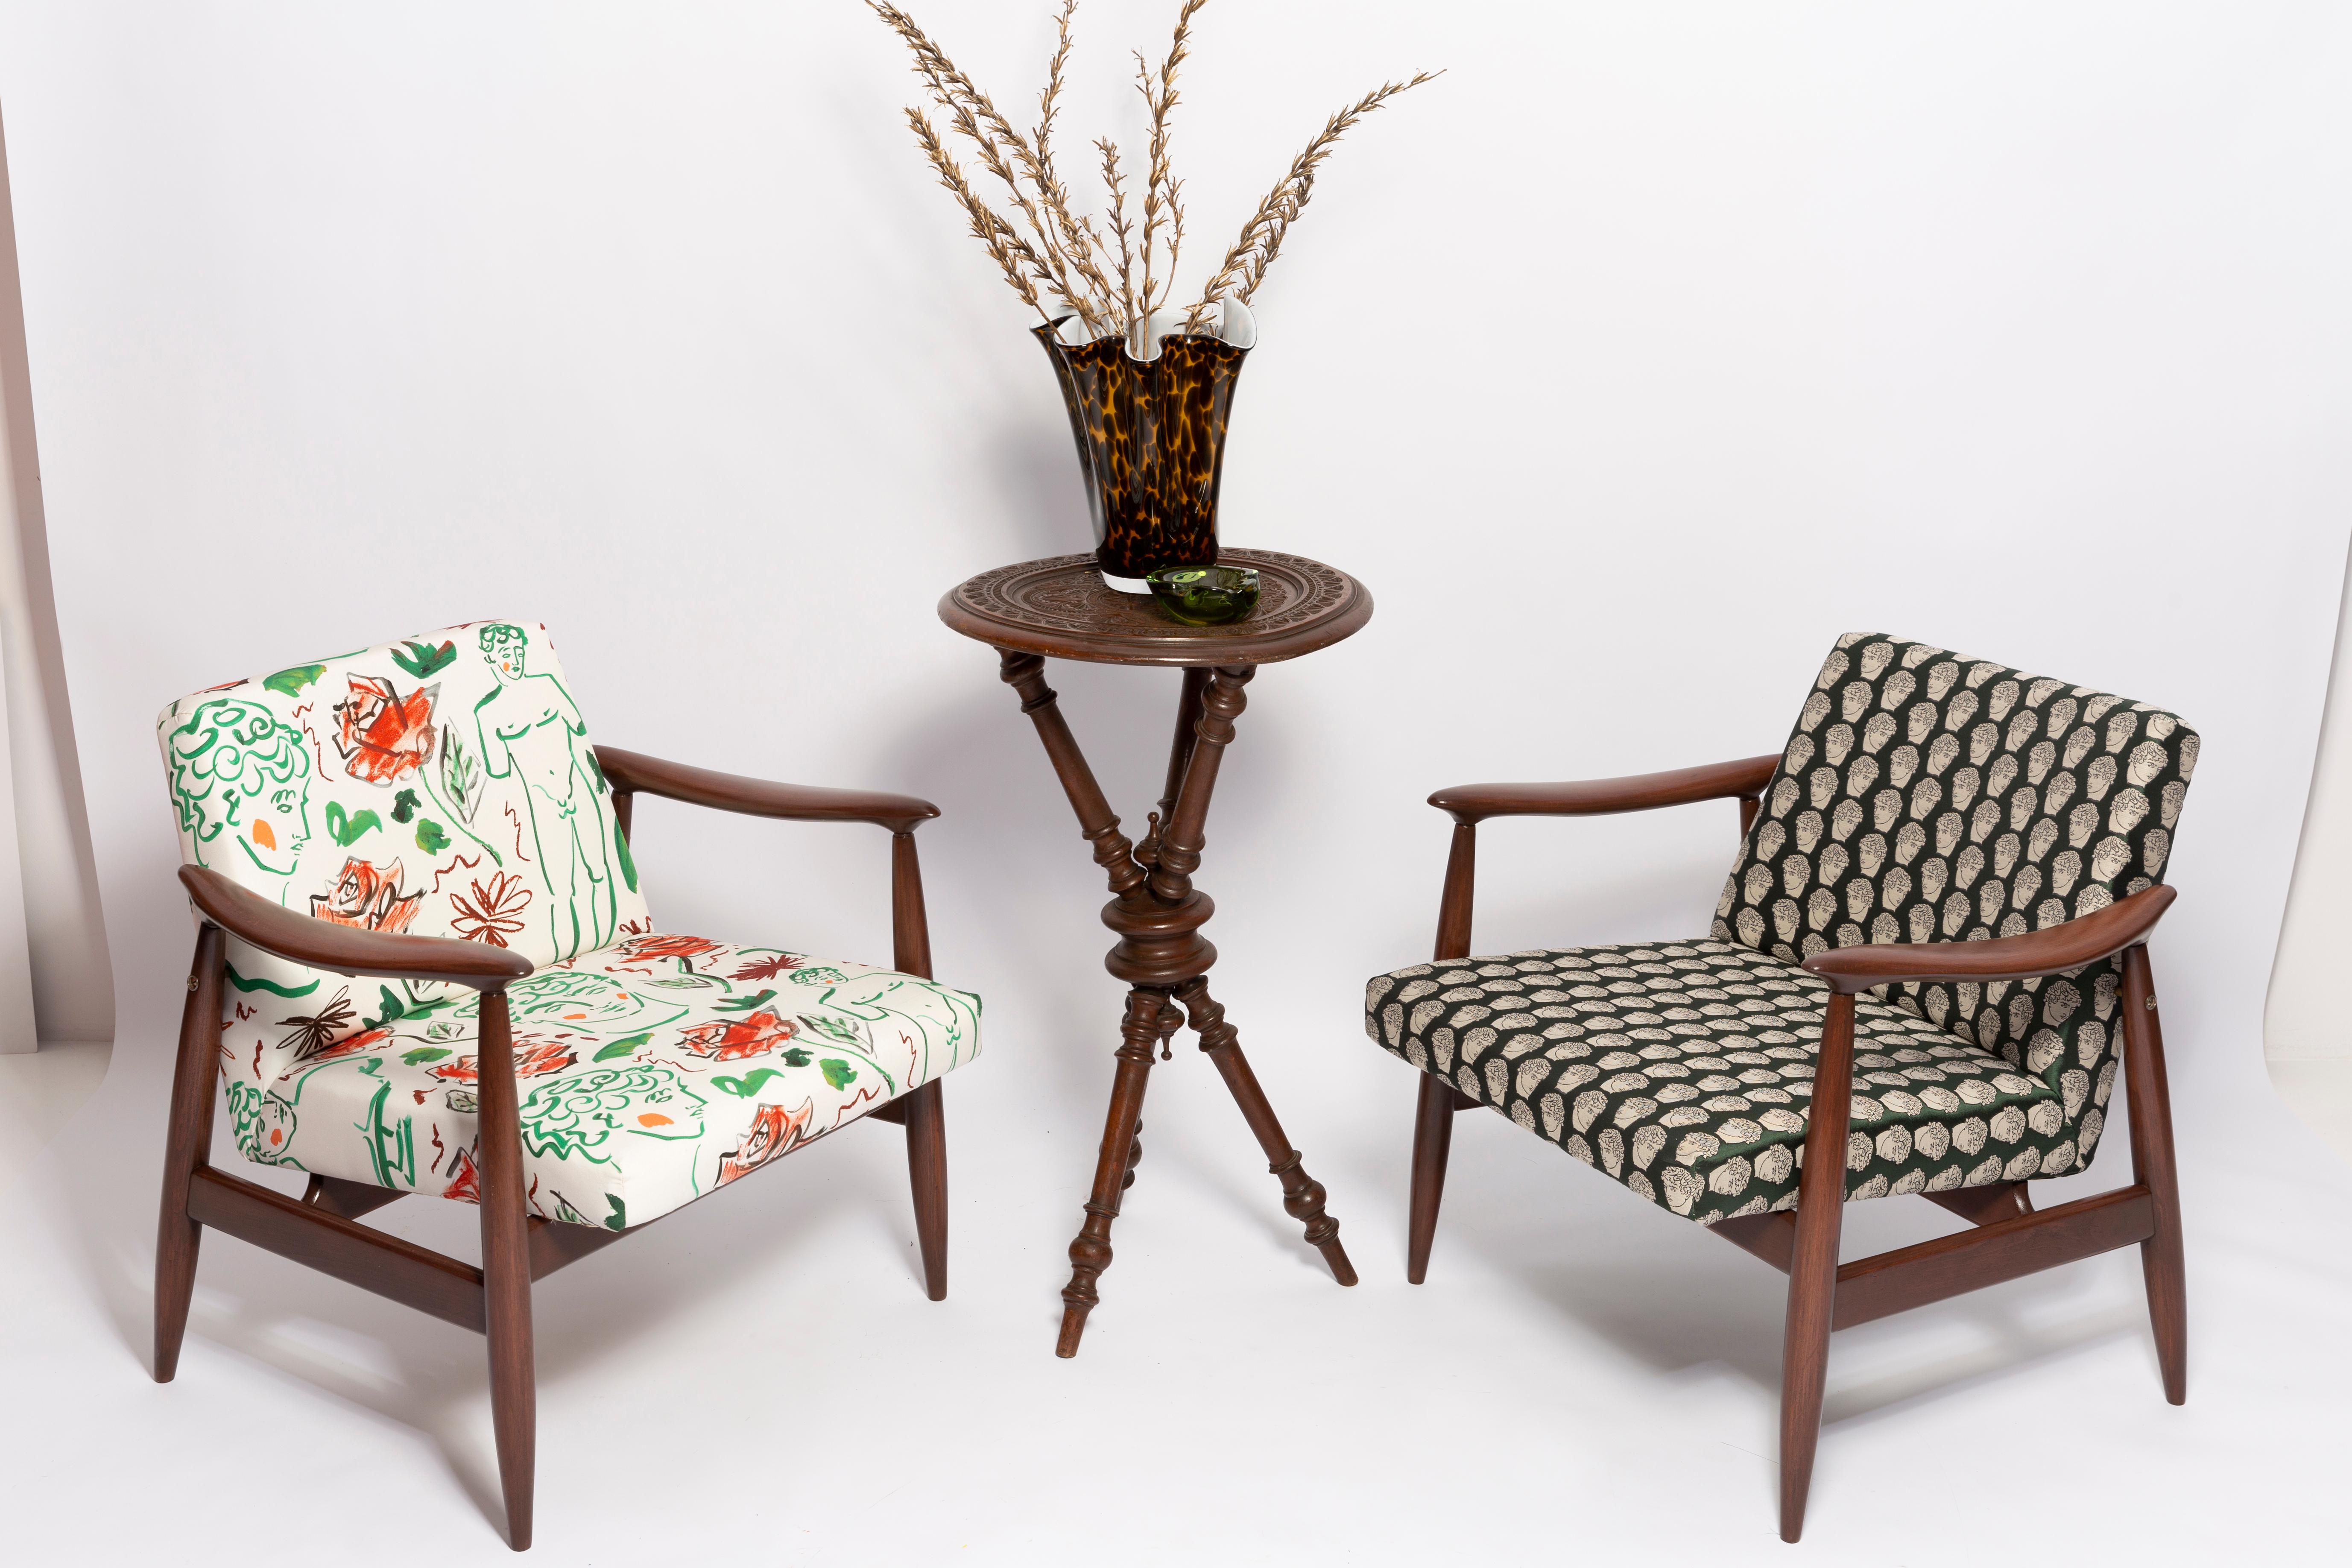 Hand-Crafted Pair of Midcentury David Print Emerald Armchairs, by Kedziorek, Europe, 1960s For Sale